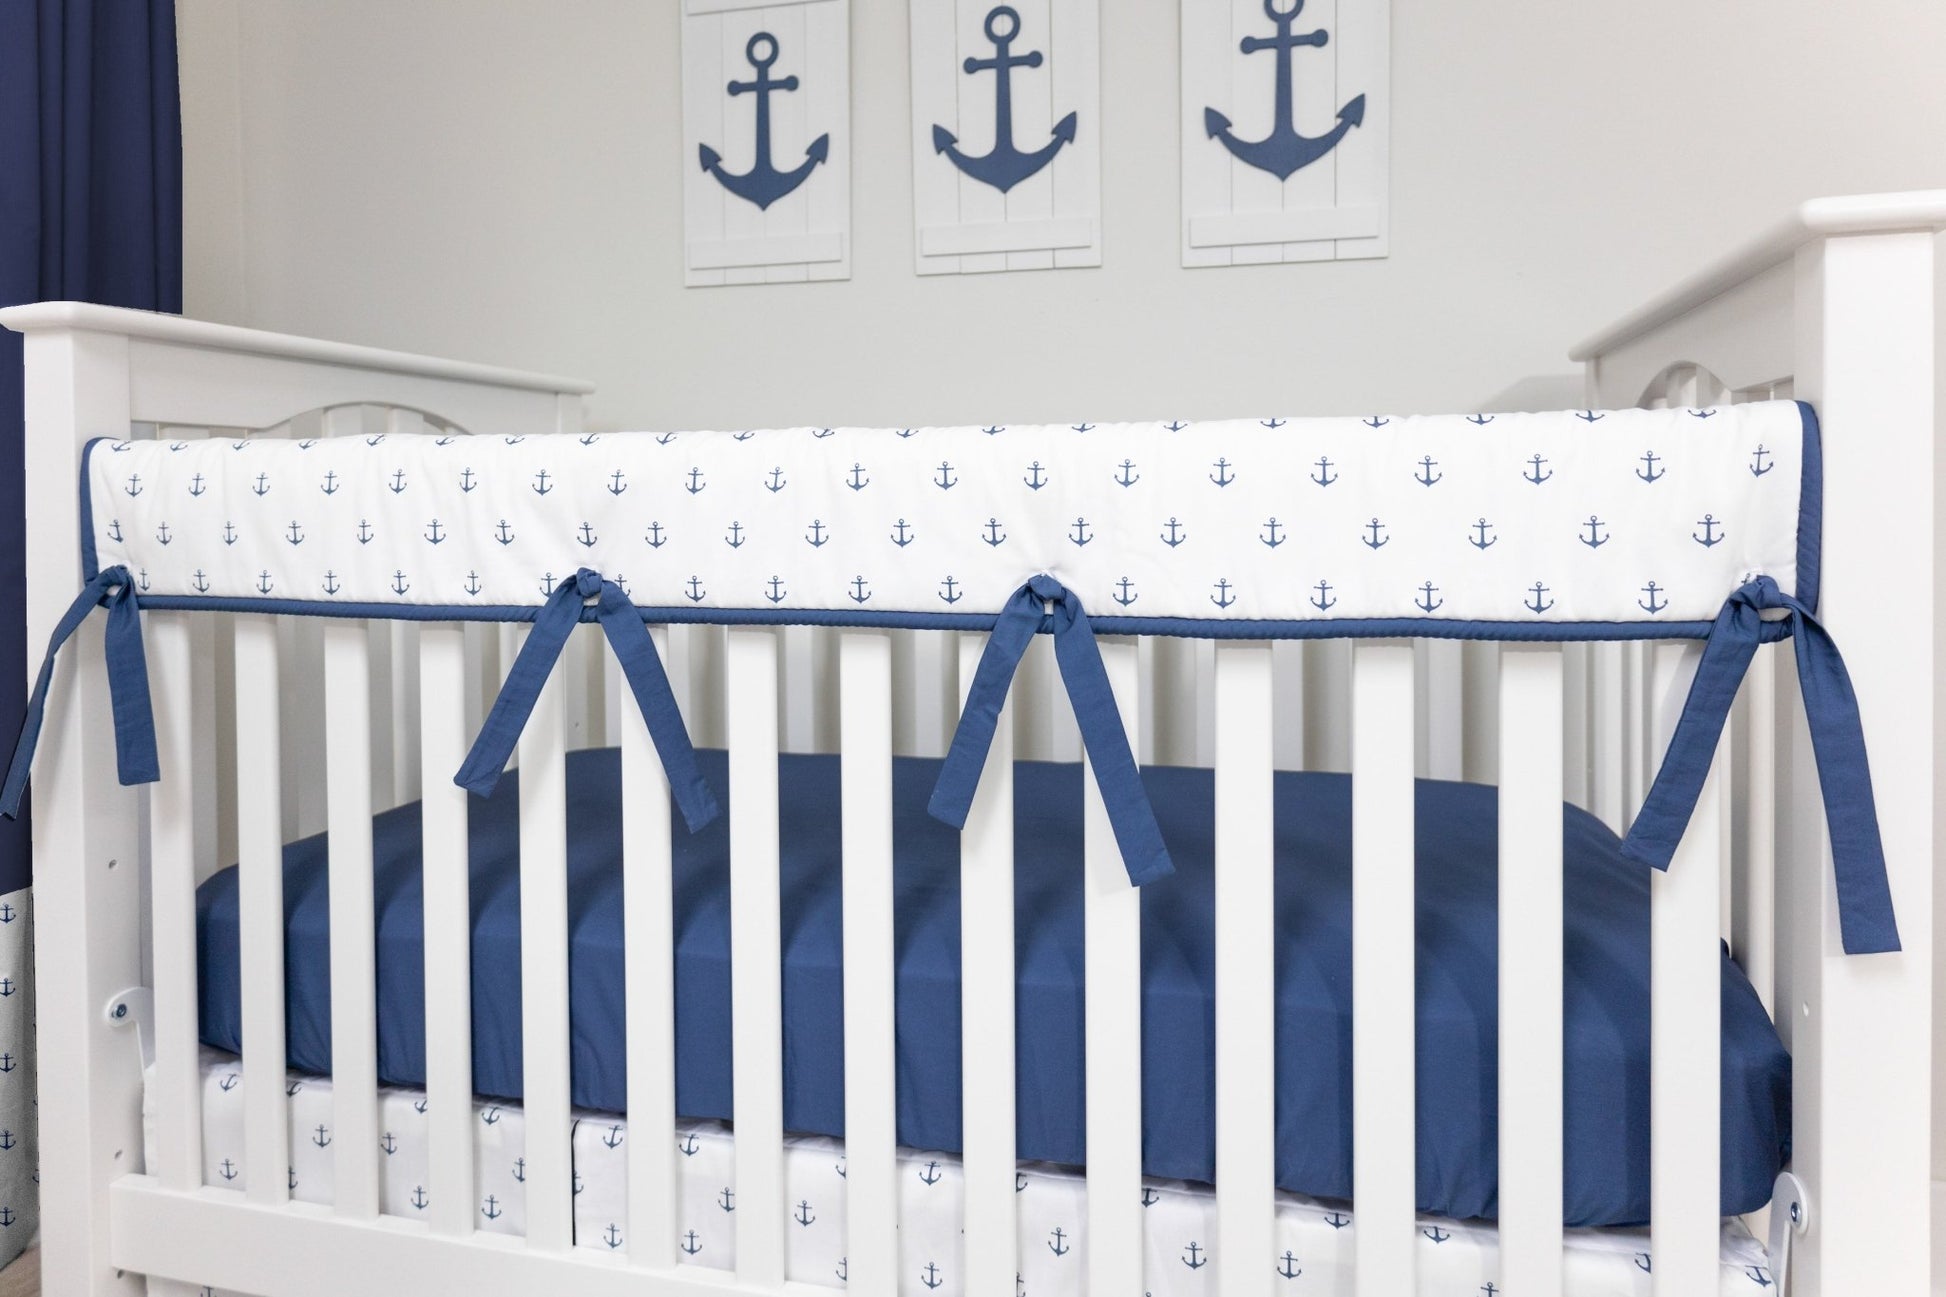 White and Navy Mini Anchors Crib Bedding - 3 Piece Set - New Arrivals Inc